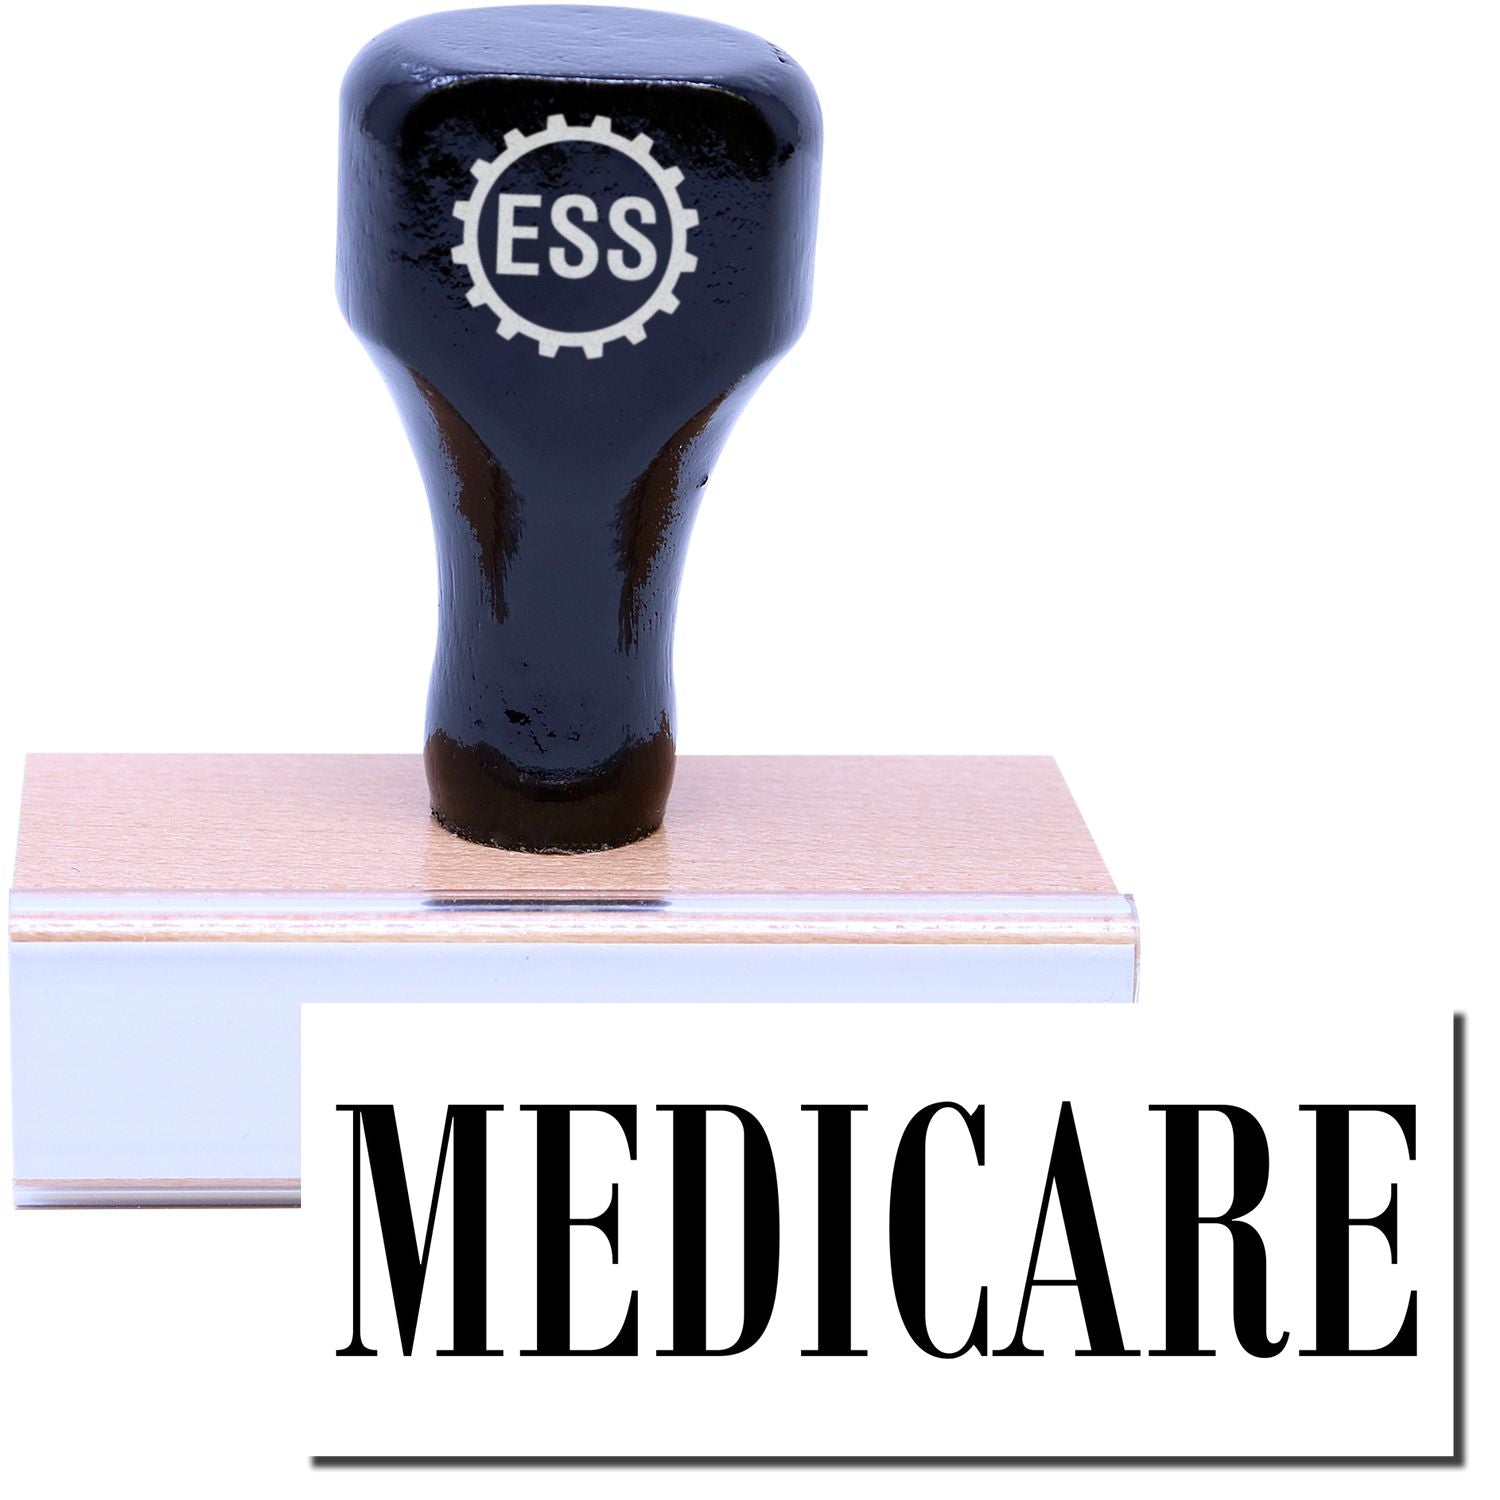 A stock office rubber stamp with a stamped image showing how the text "MEDICARE" is displayed after stamping.